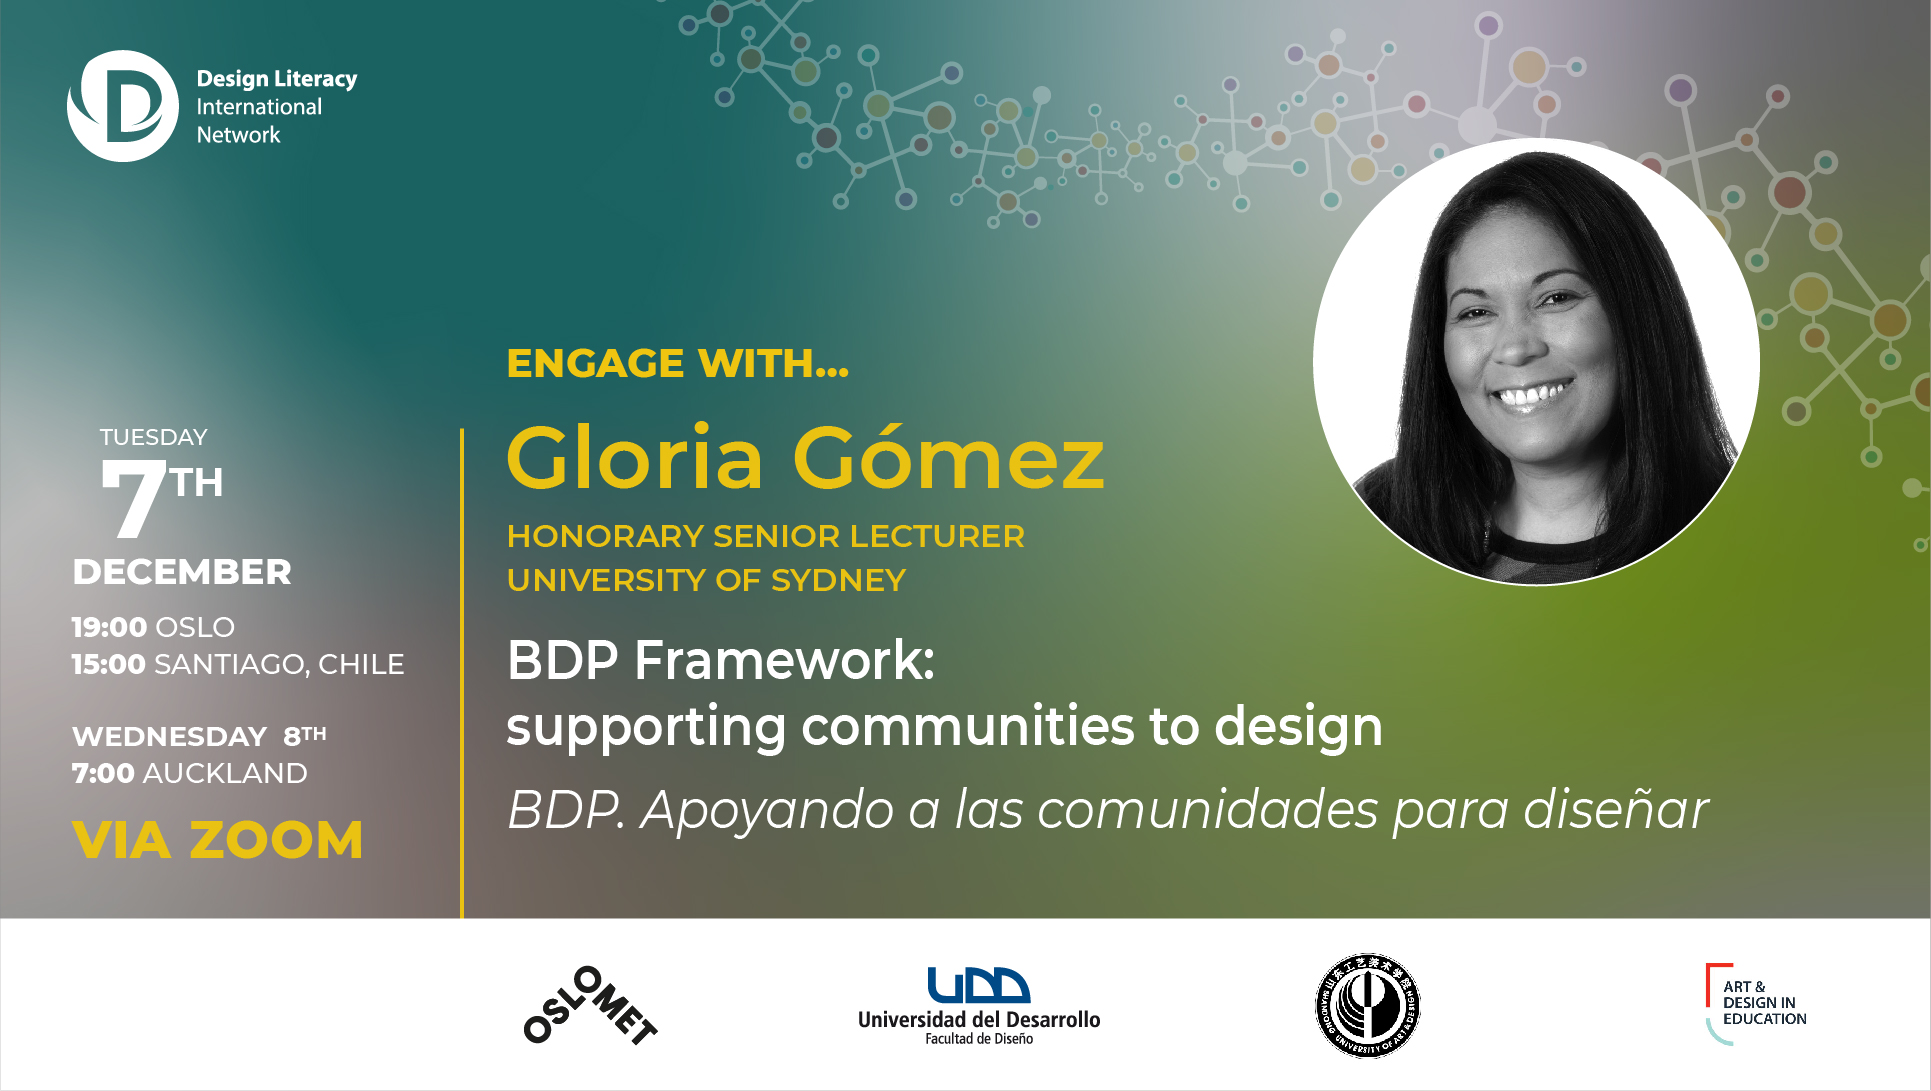 You are currently viewing Engage with Gloria Gomez | Design Literacy International Network event